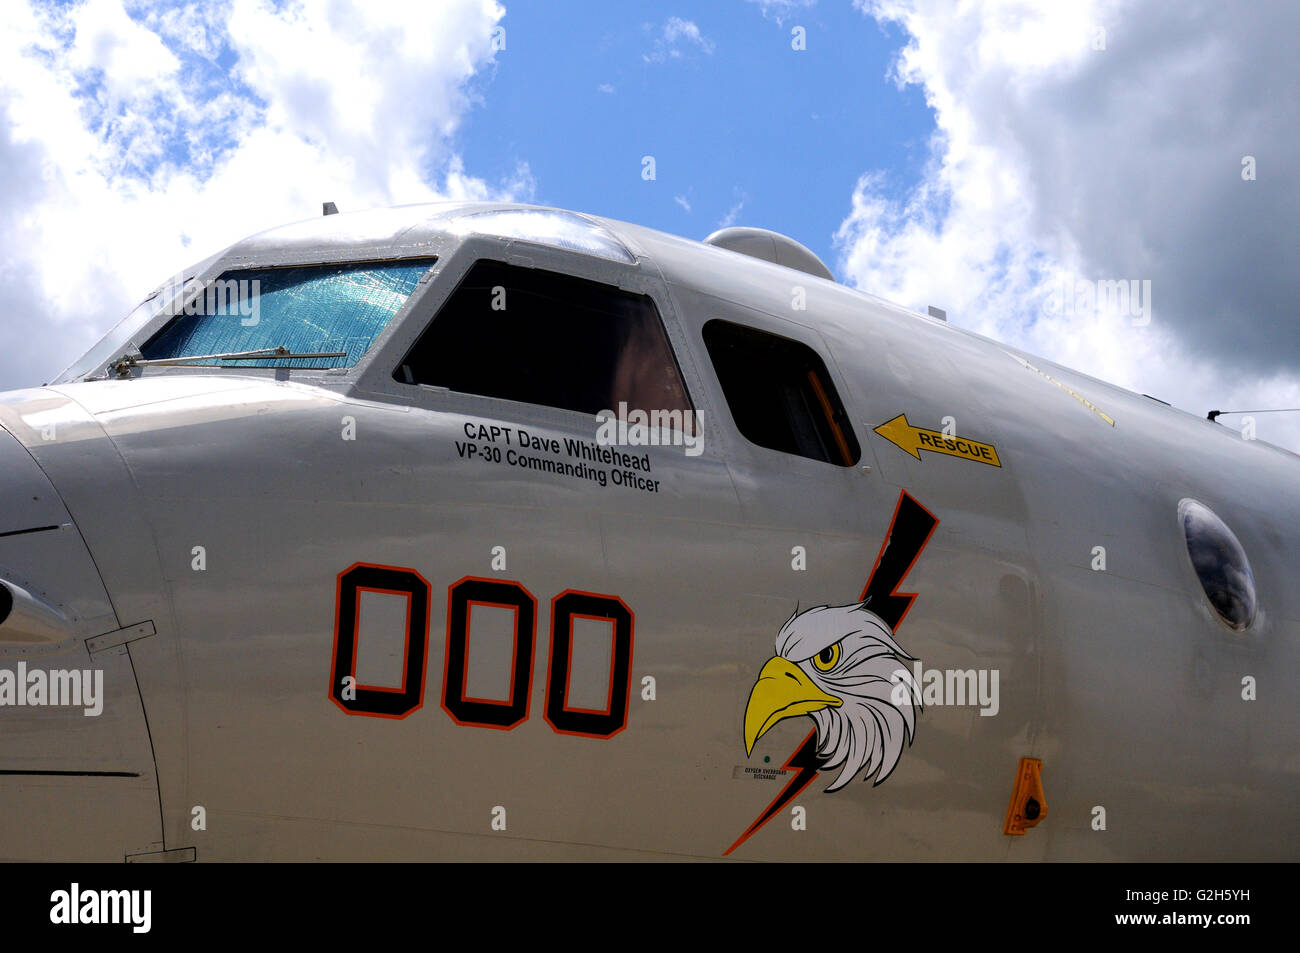 A U.S. Navy P-3 Orion on display at an airshow in Missouri, USA Stock Photo